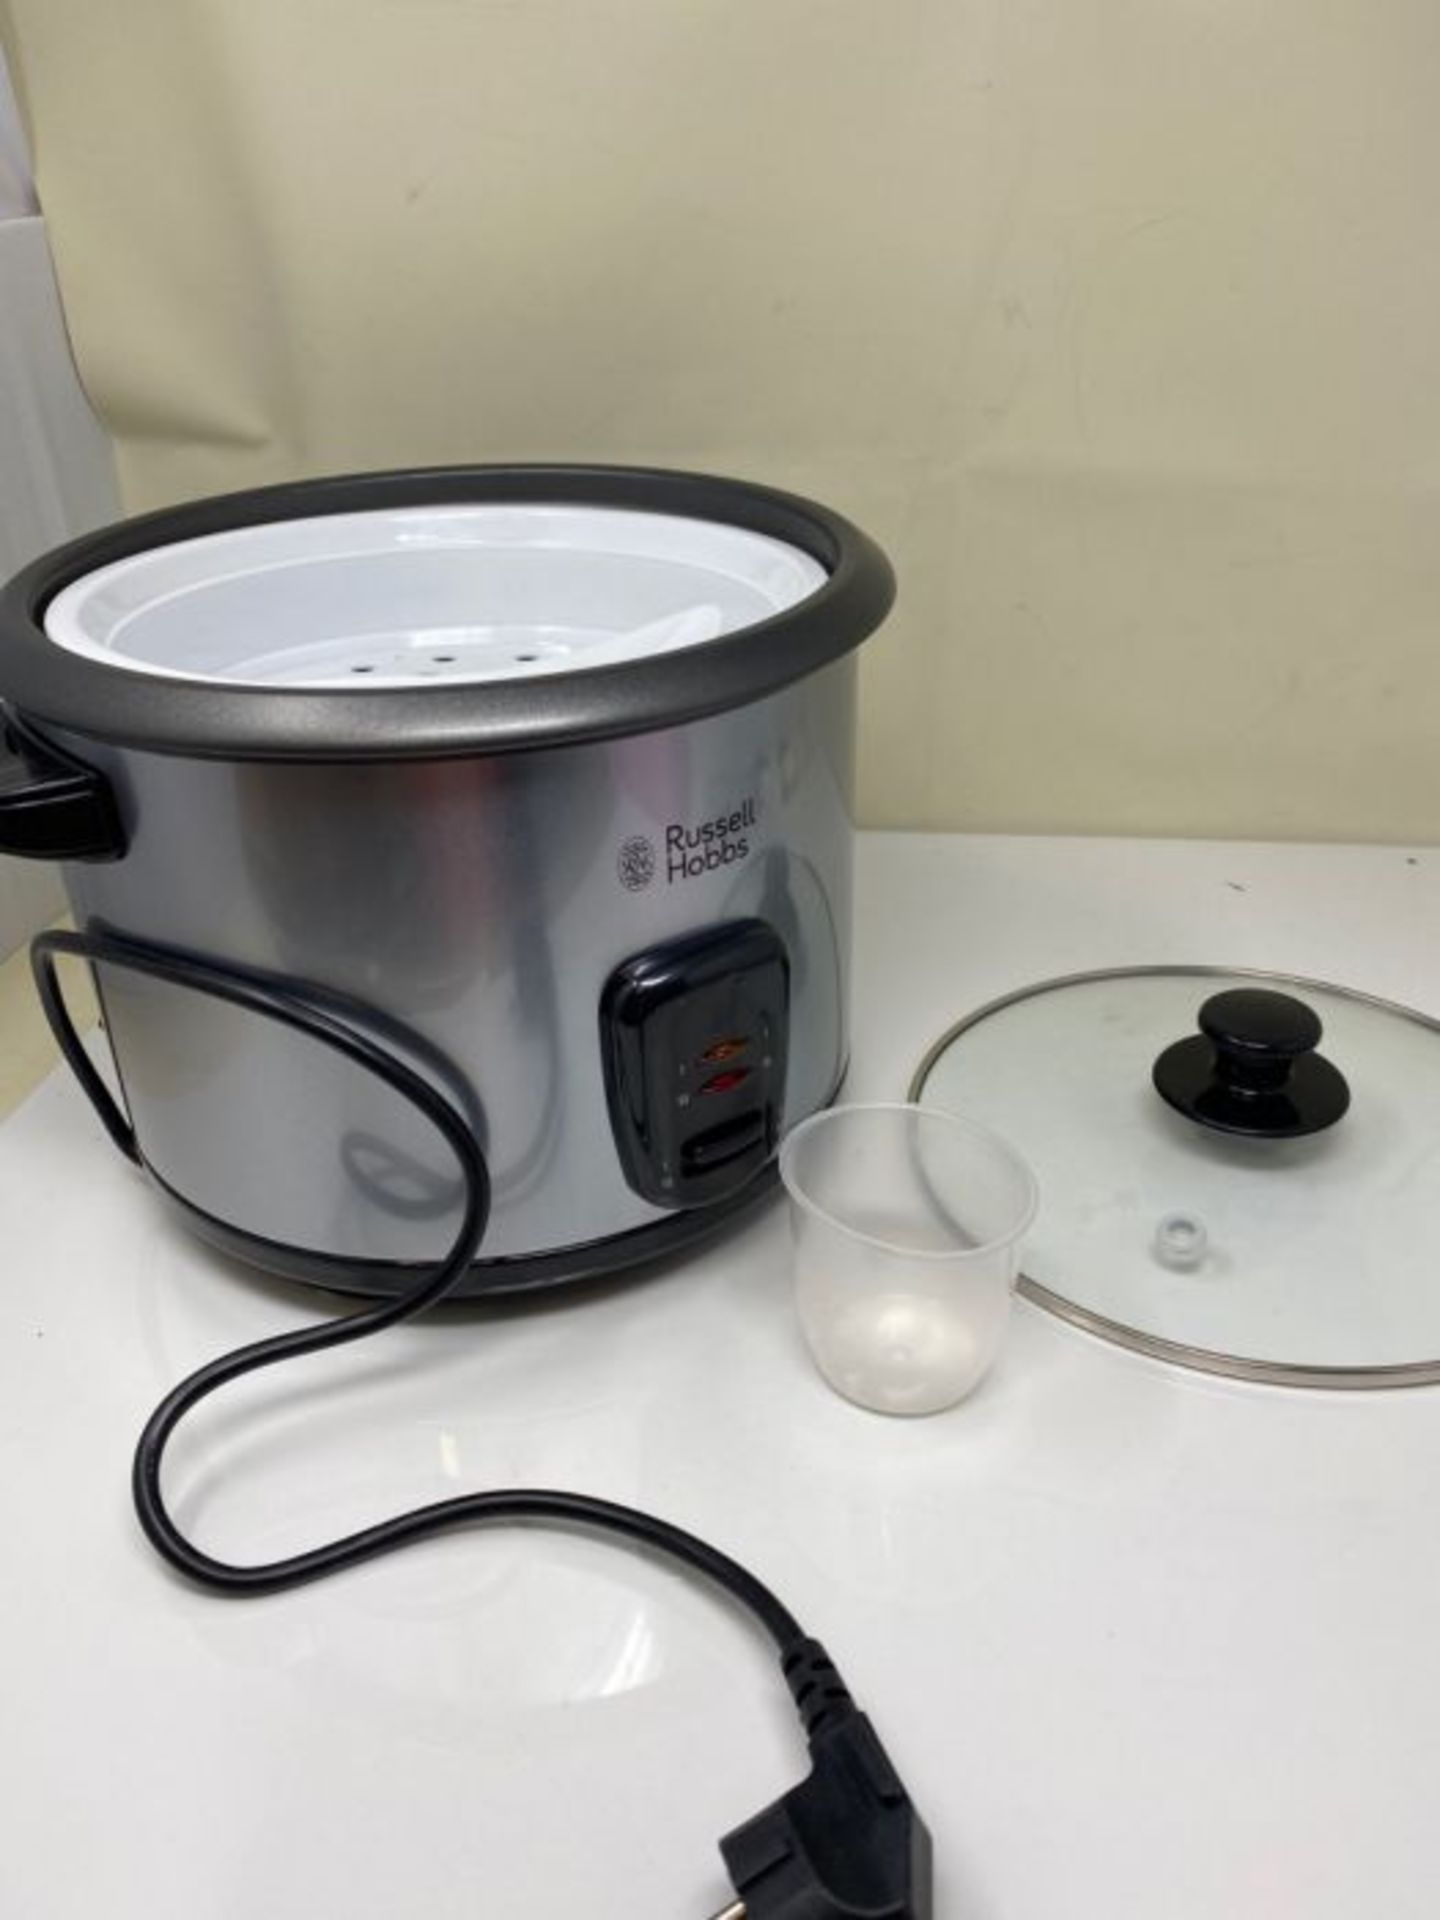 Russell Hobbs Cook @ Home 19750-56 rice cooker with 700 W and 1.8 litre capacity made - Image 3 of 3